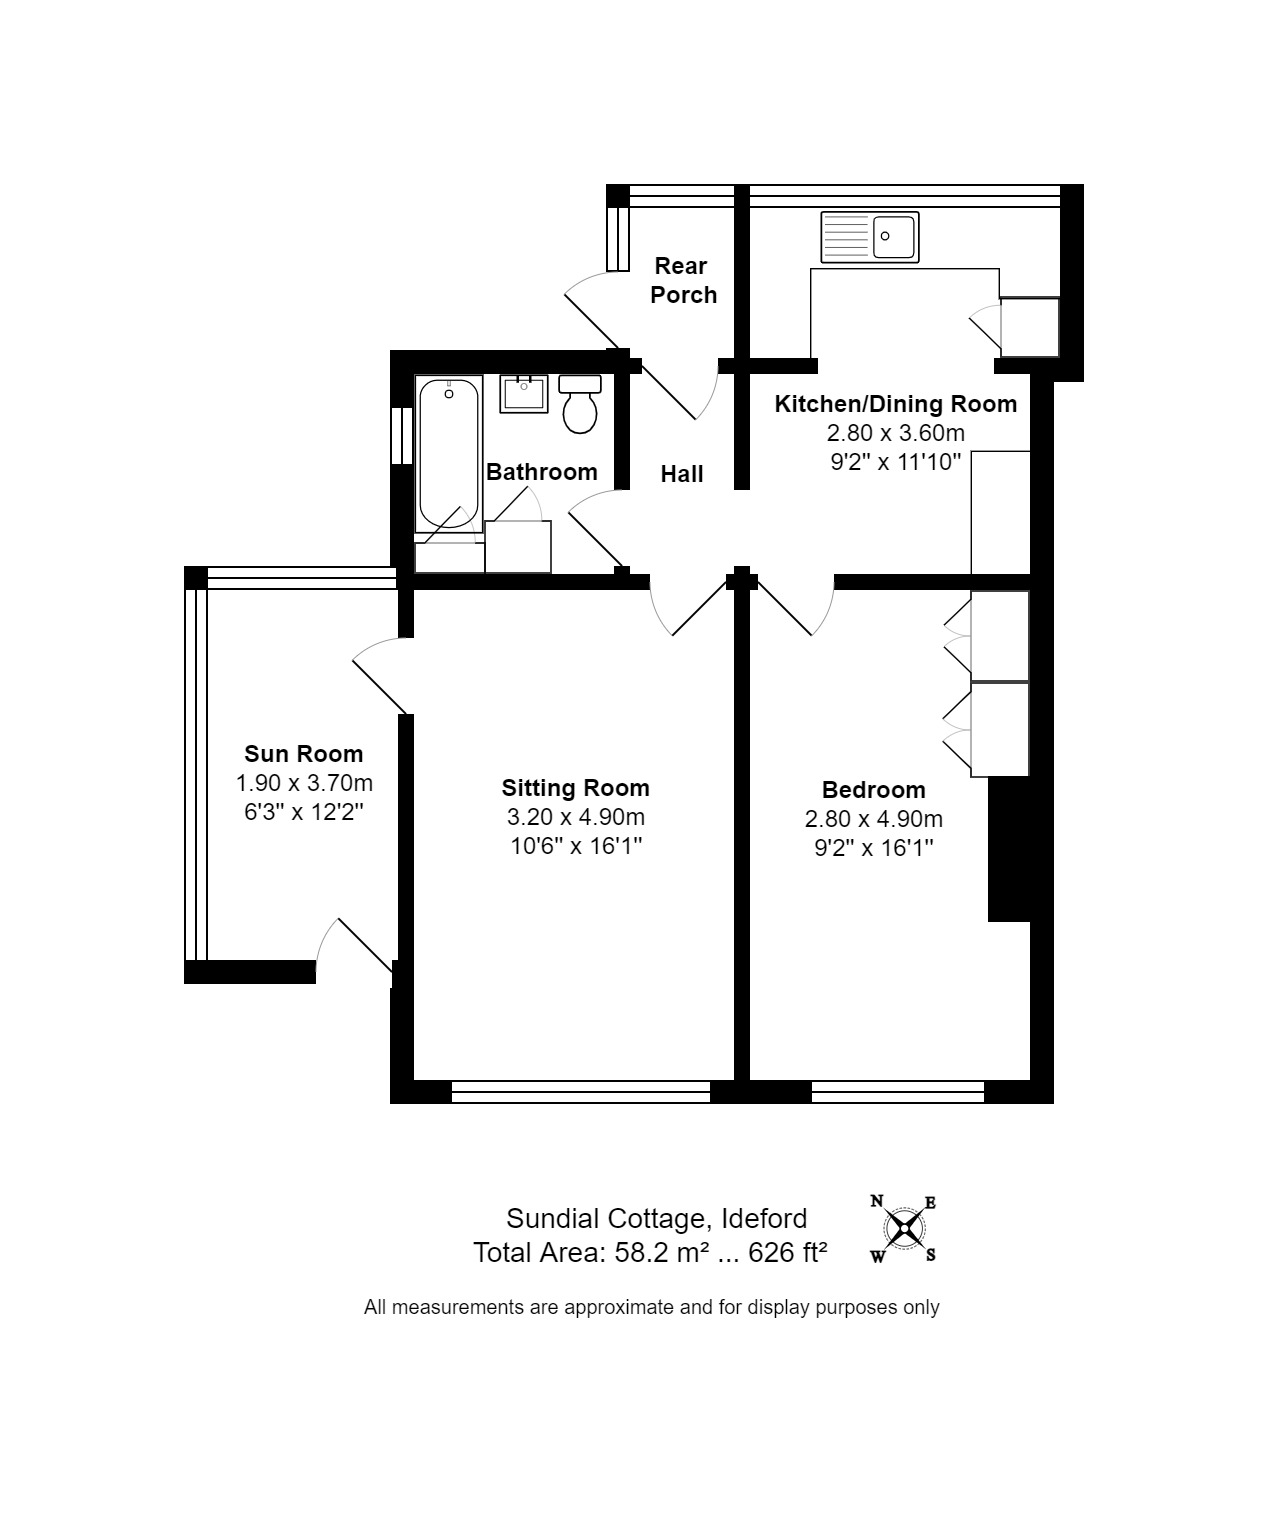 1 bed bungalow for sale in Ideford, Newton Abbot - Property floorplan